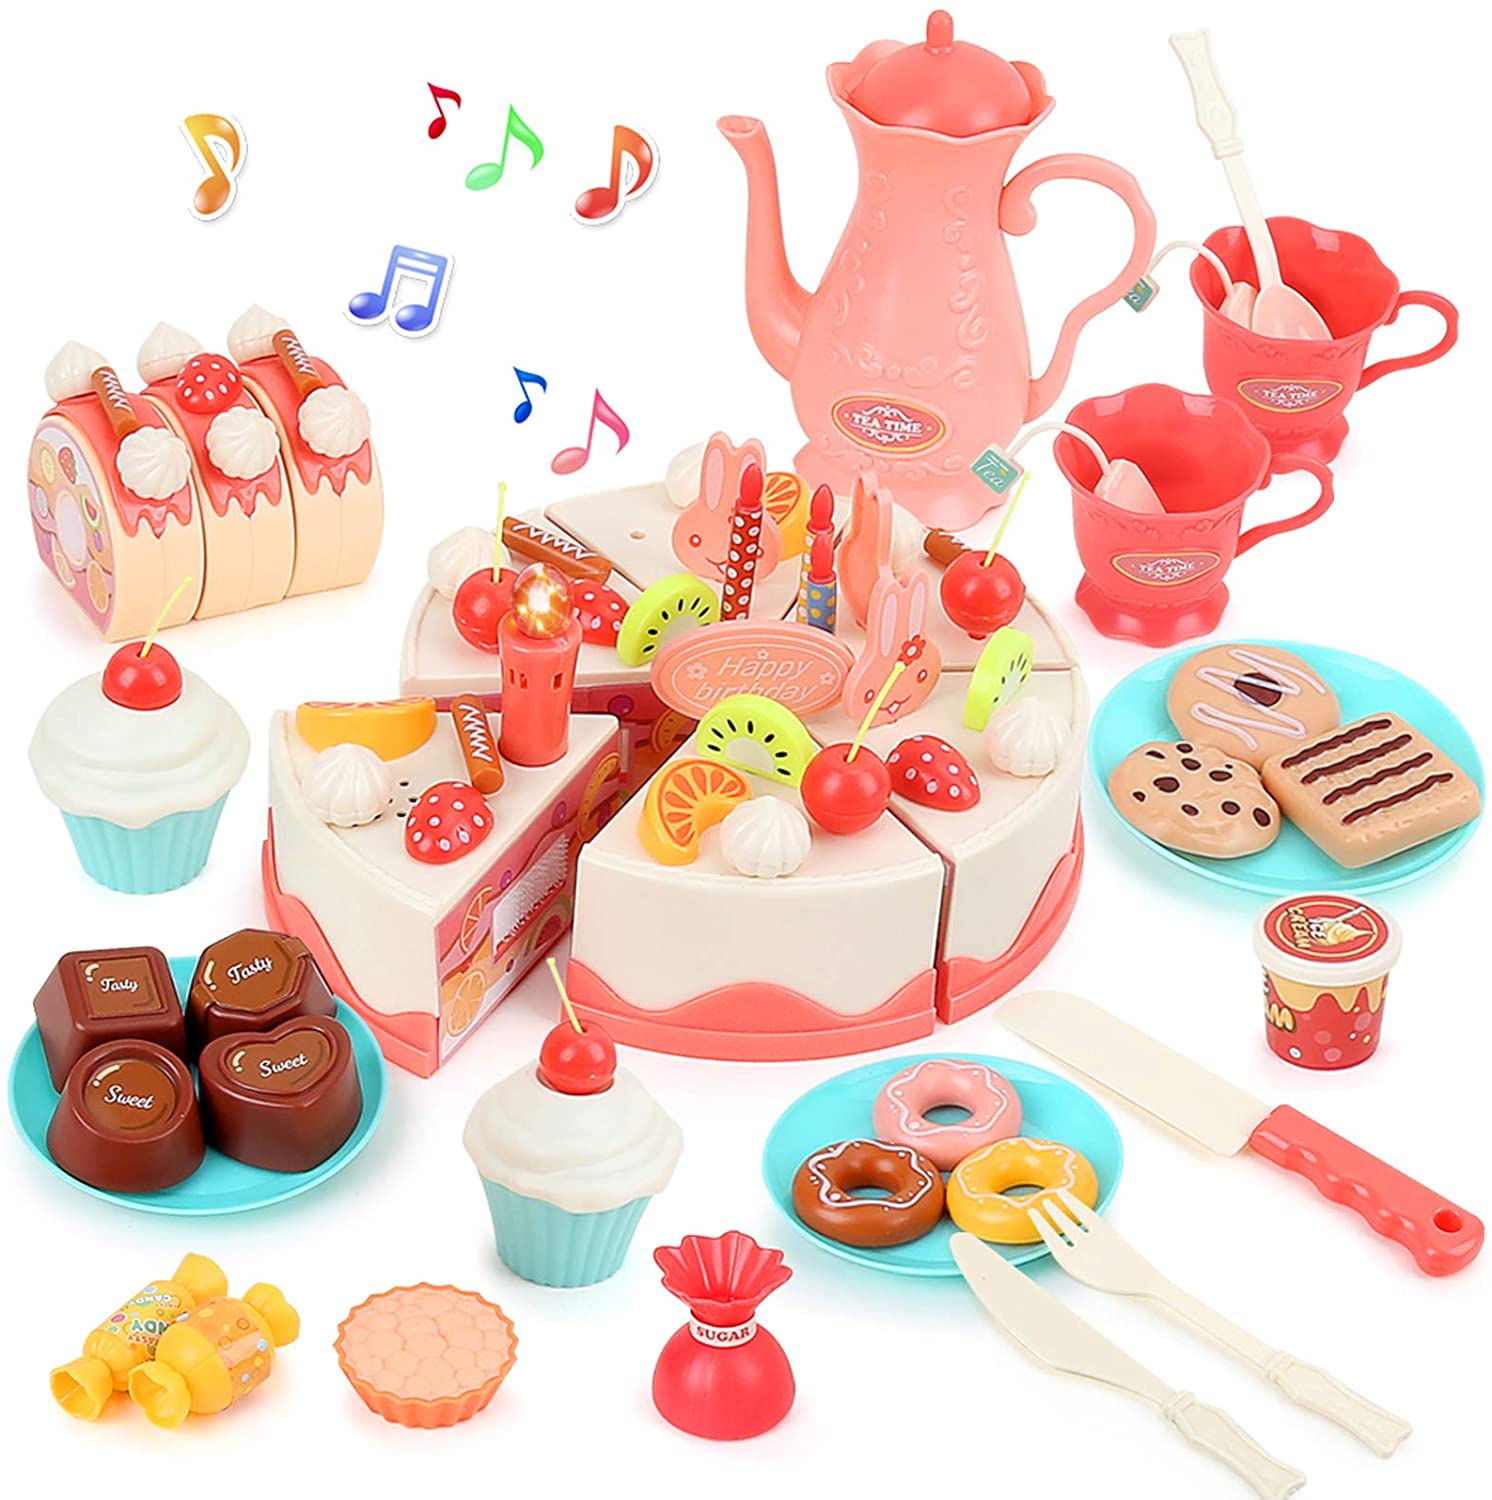 Fixed Competitive Price Wooden Counting Toy - Beebeerun Pretend Play Food for Kids,DIY 82PCS Cutting Birthday Cake Toy with Candles Fruit Dessert Plates Teacup and More,Educational Toy Kitchen Set...